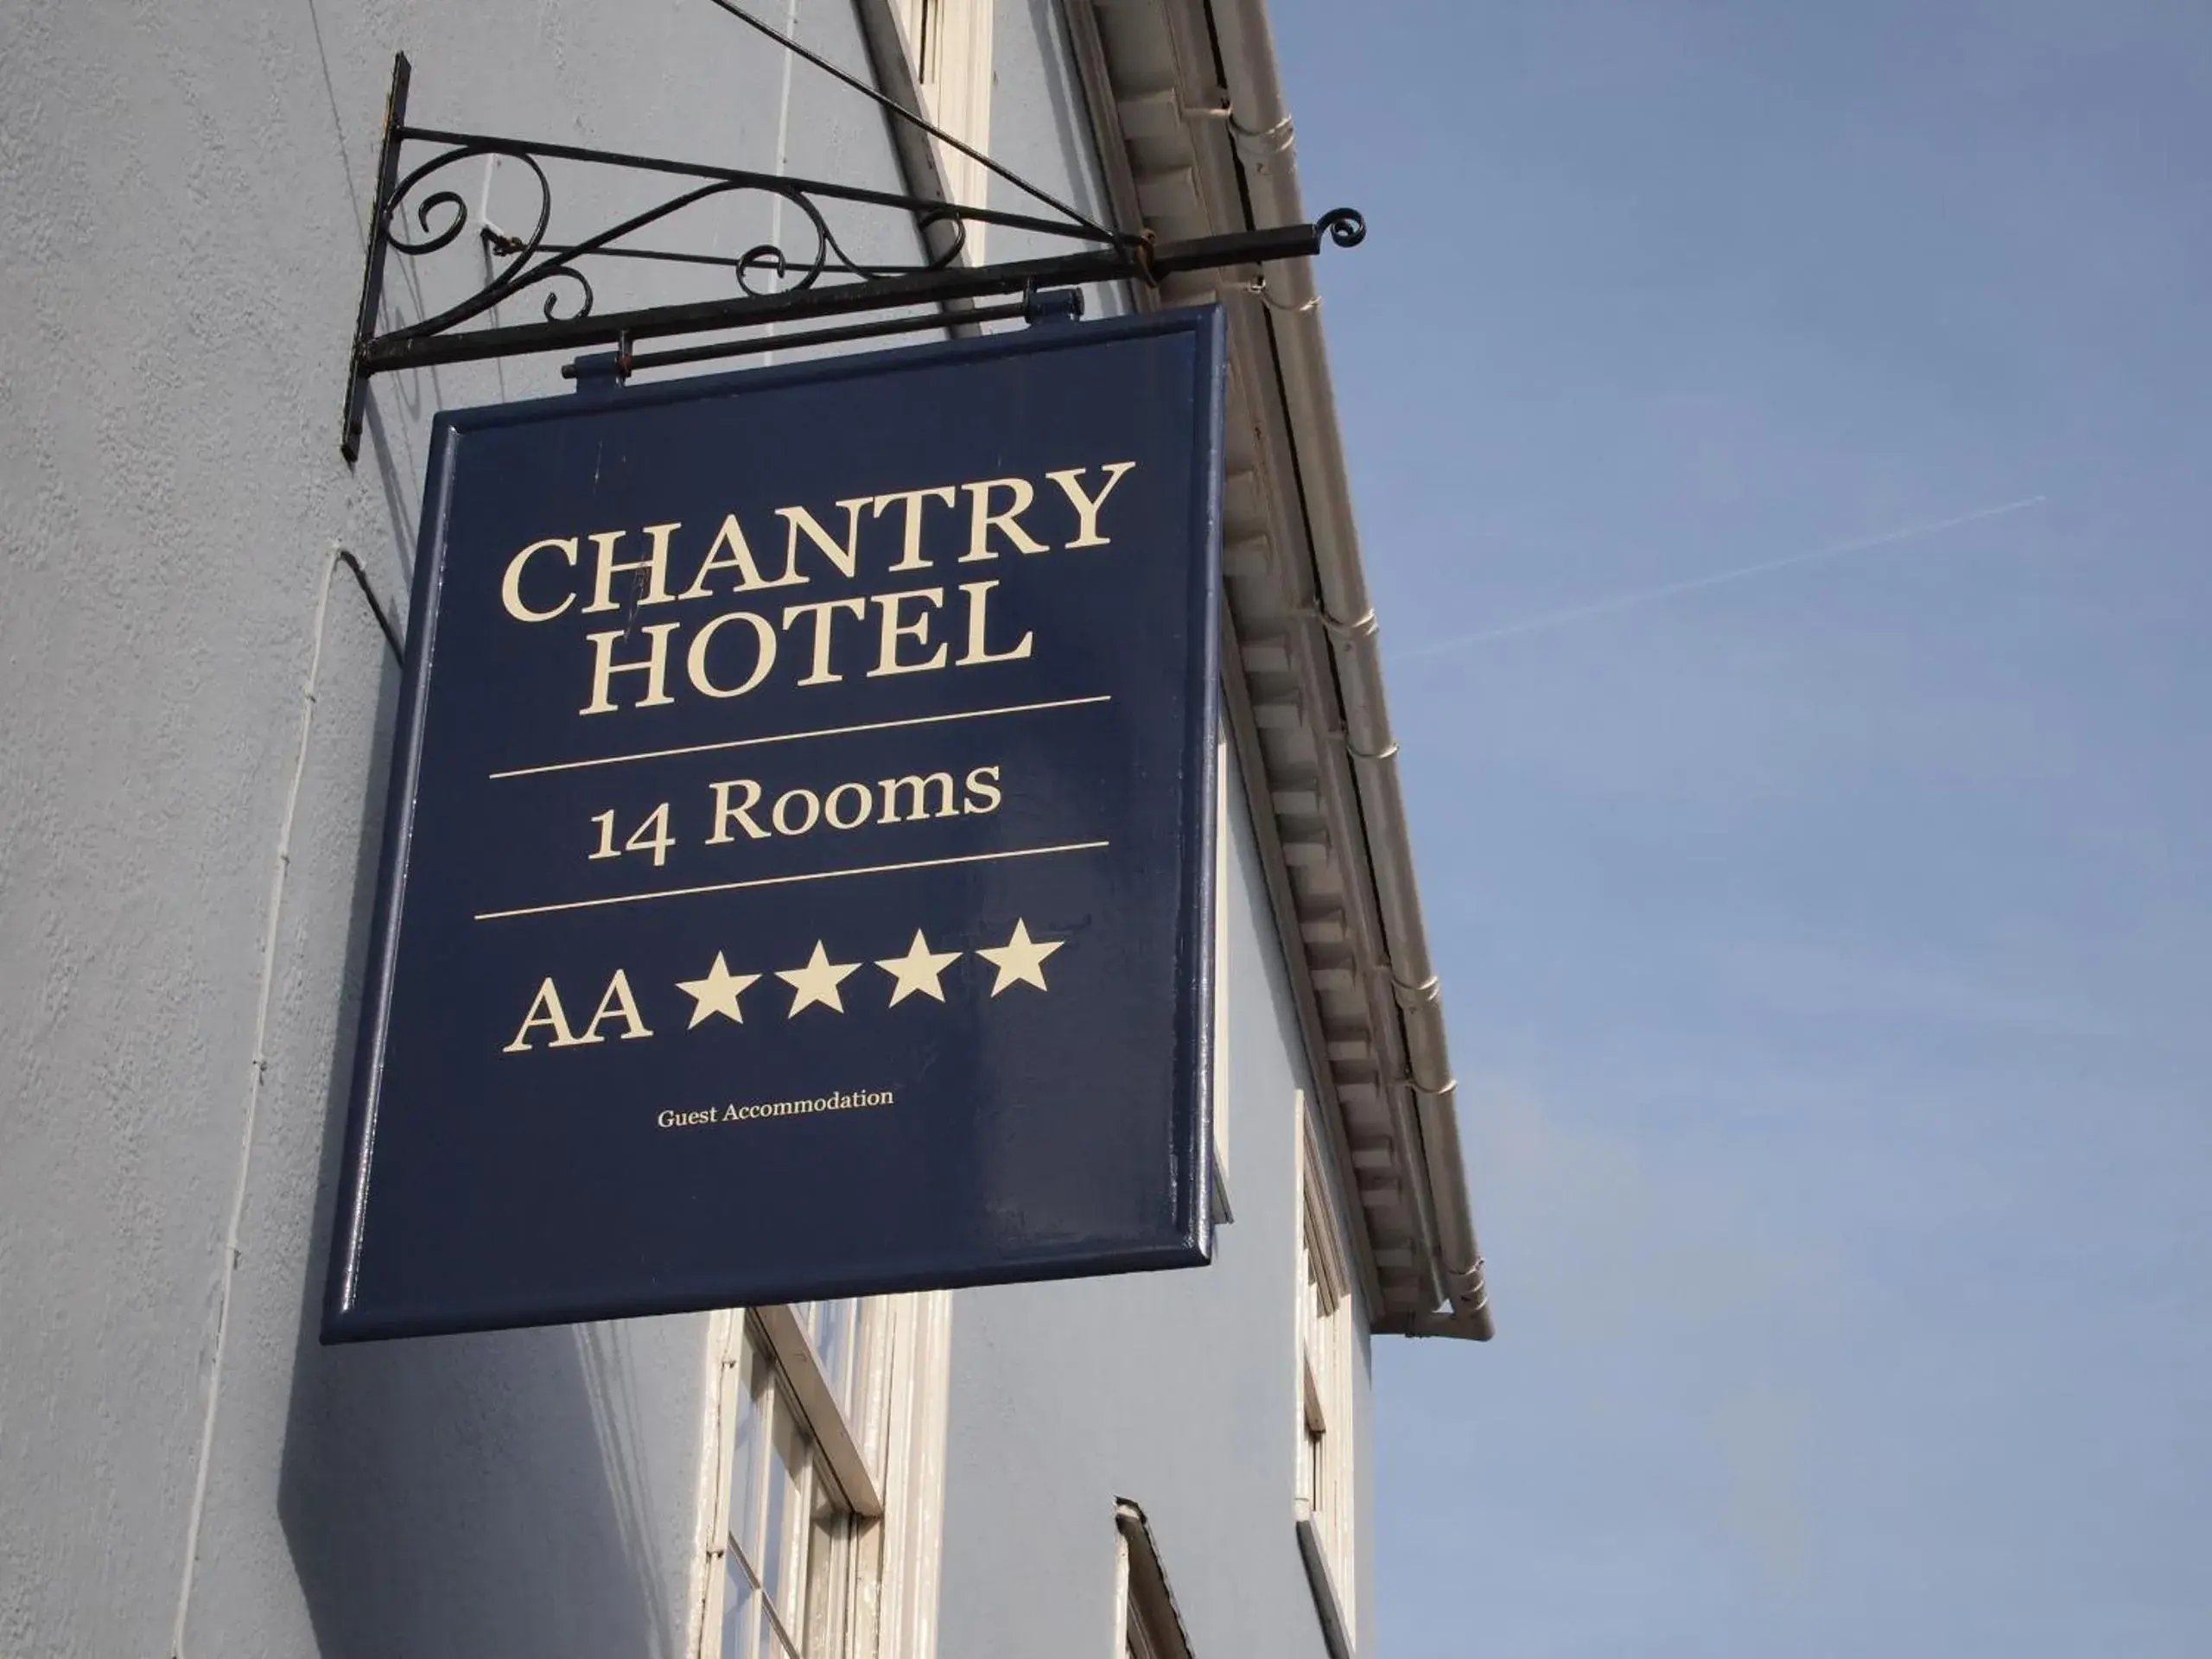 Property logo or sign in Chantry Hotel